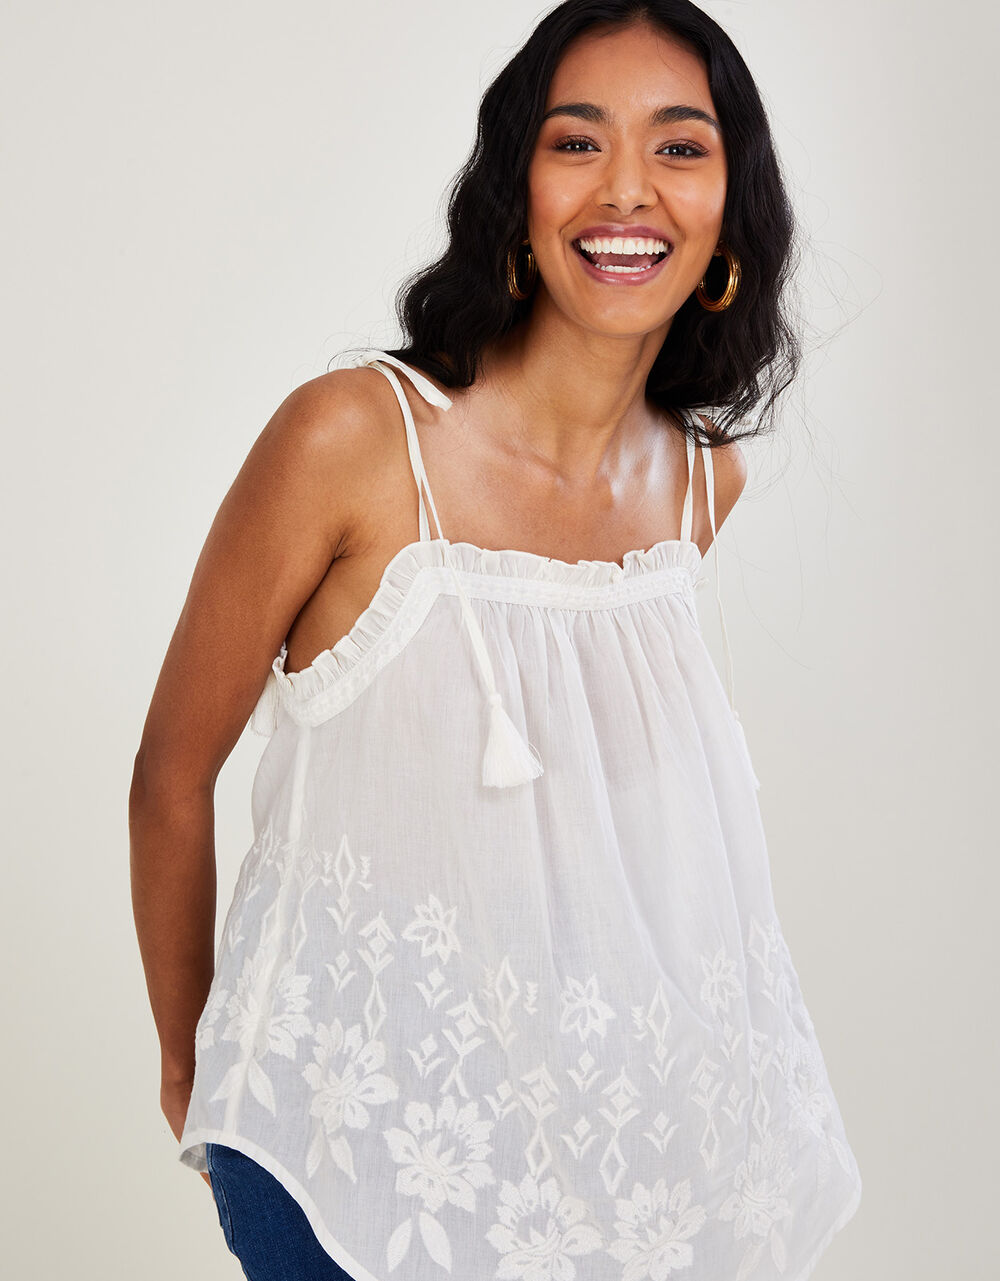 Women Women's Clothing | Embroidered Cami Top in Sustainable Cotton White - YO90816